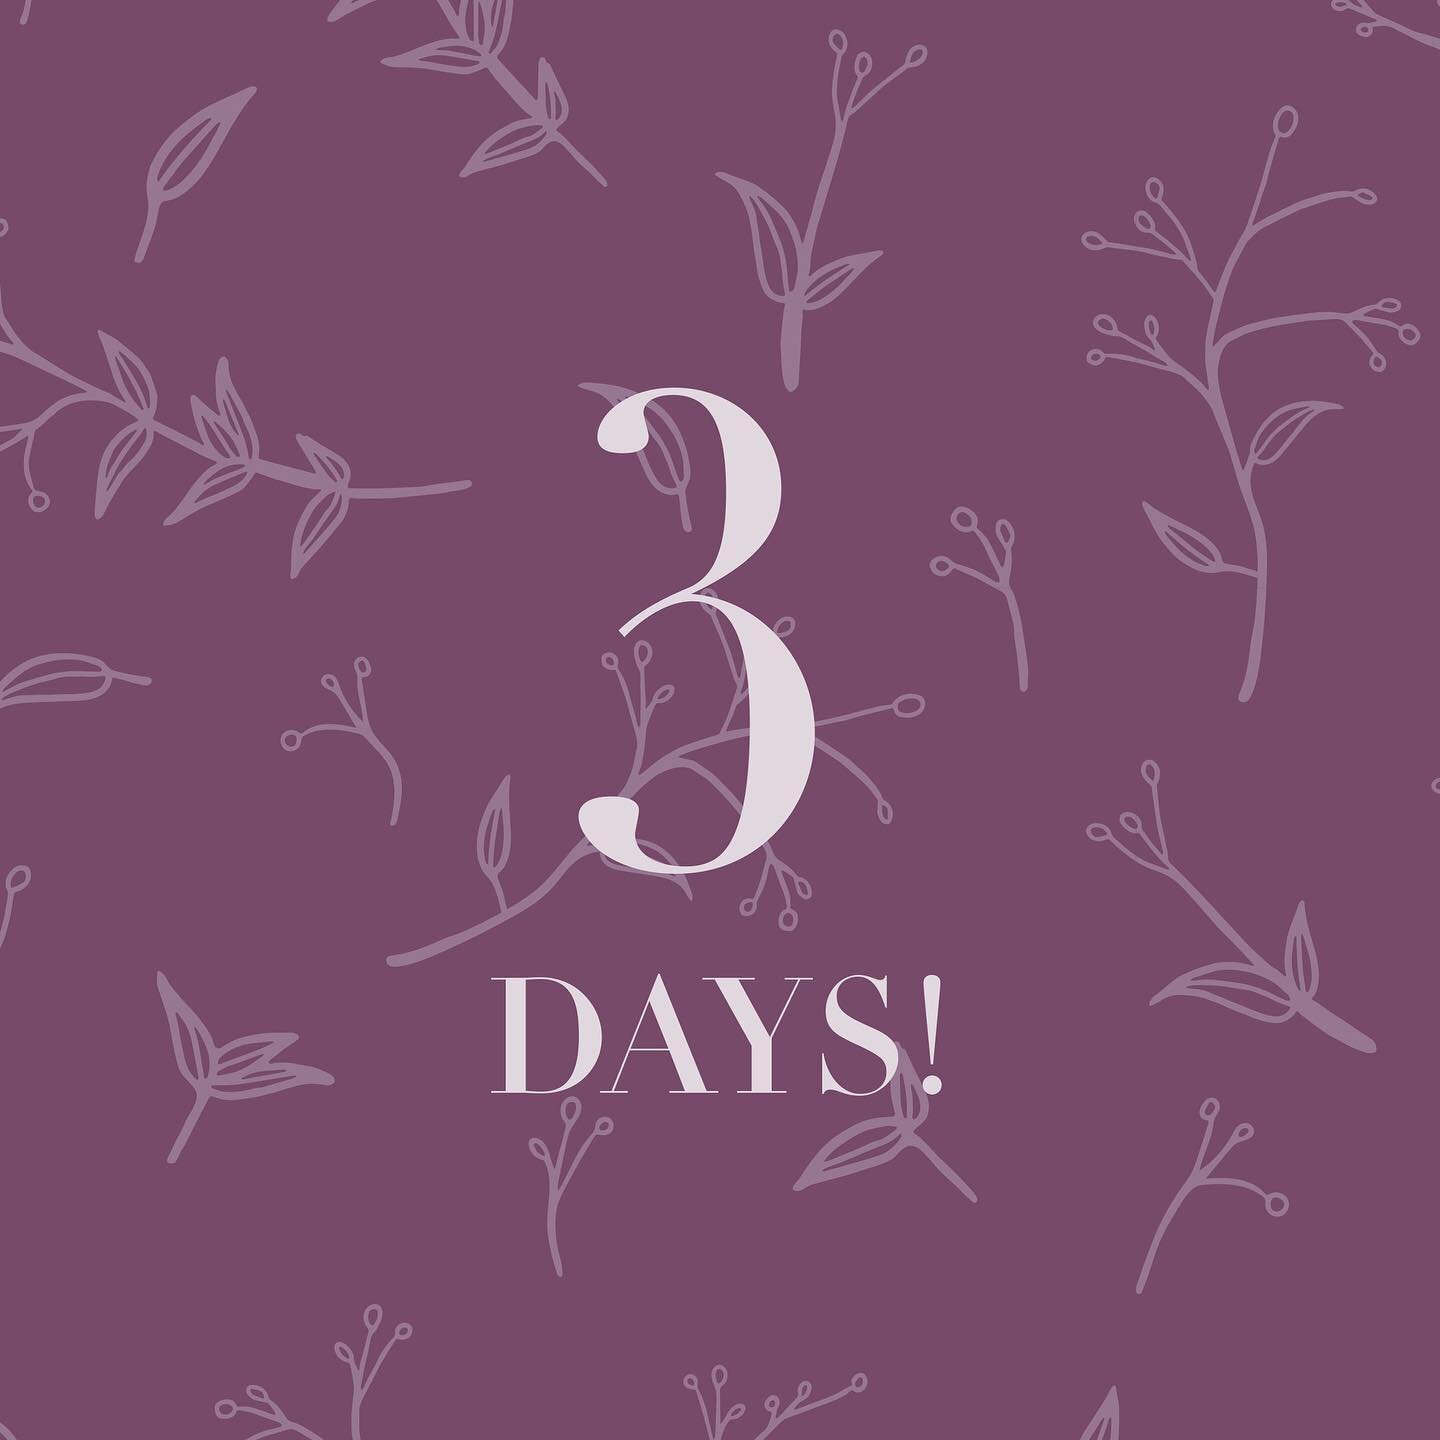 Three days left until my website launch!

www.imprintsandink.com will go live this Saturday. The&ldquo;Rare Treasures&rdquo; collection will be available to shop on the site and you will be able to find out all about the inspiration behind my designs